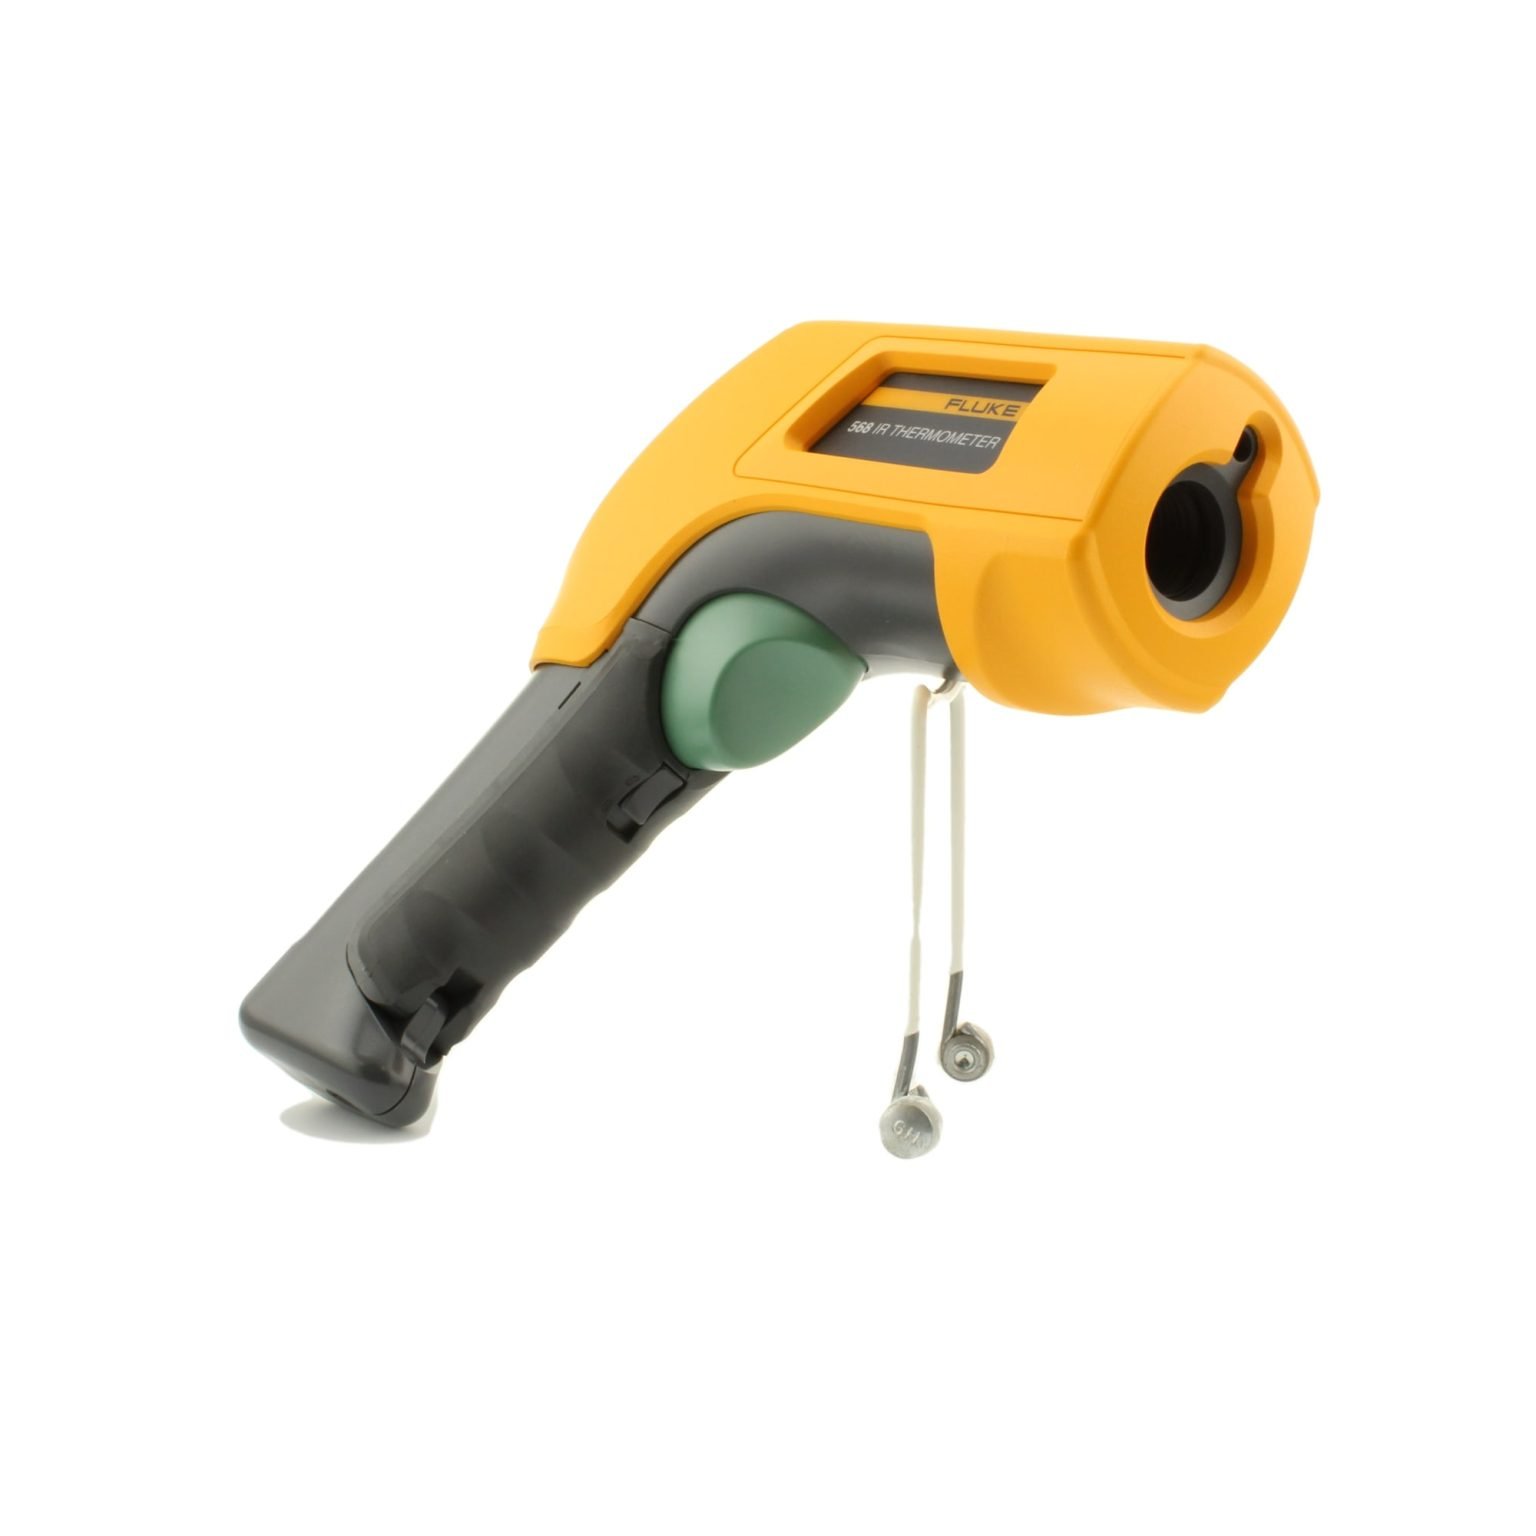 Fluke 568 Contact And Infrared Temp Gun Conres Test Equipment 2654